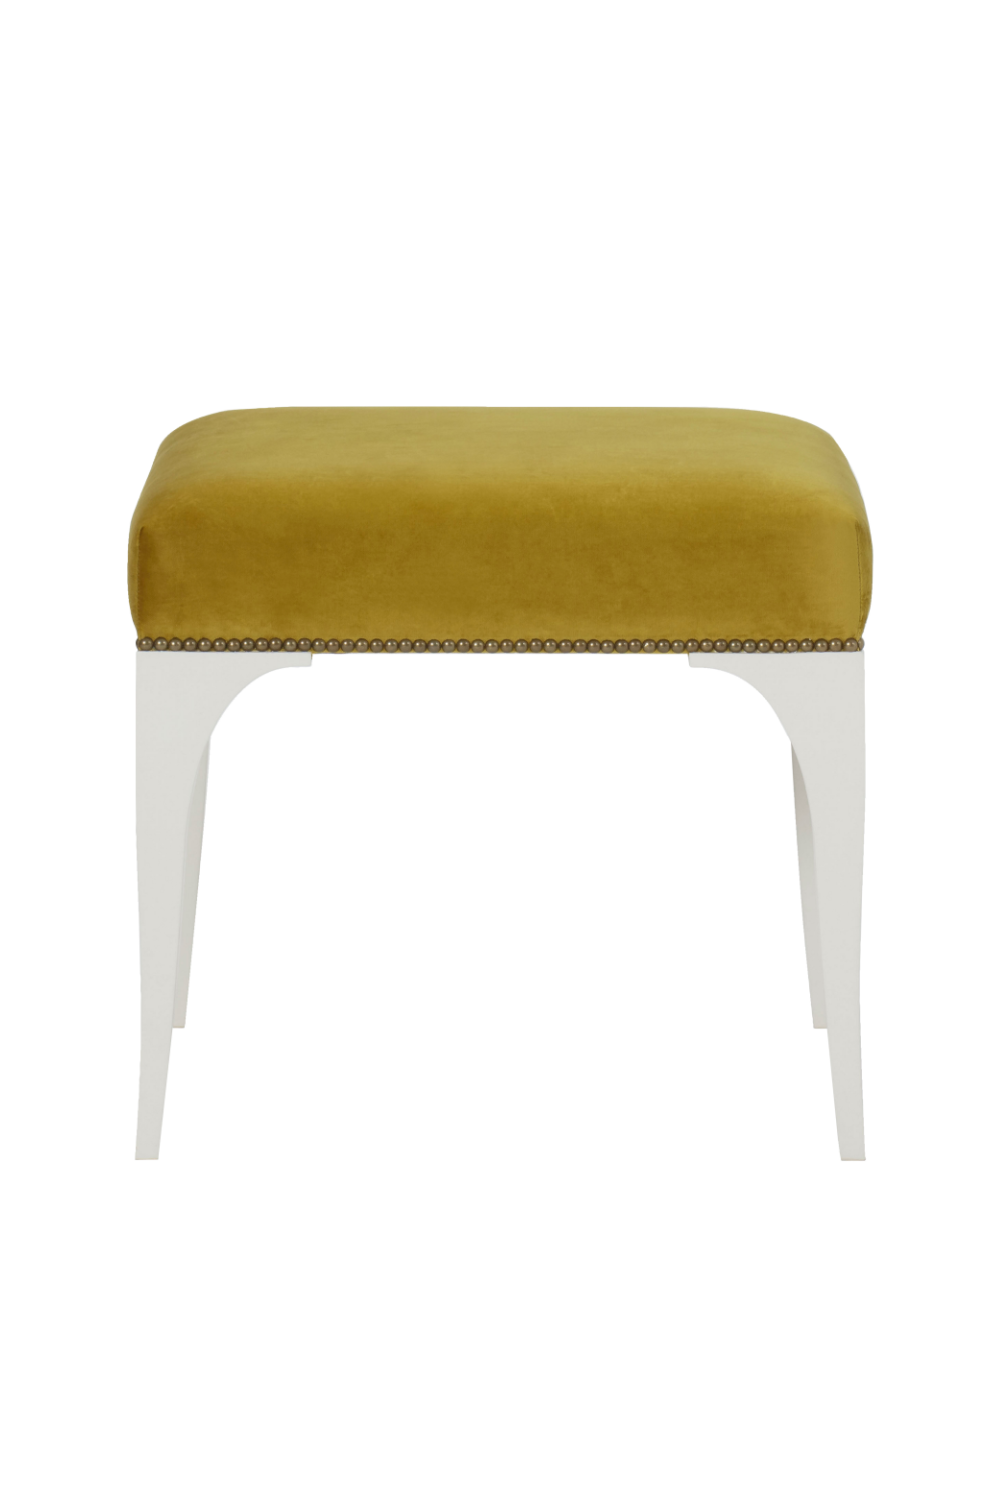 Yellow Leather Studded Bench | Andrew Martin James | OROA